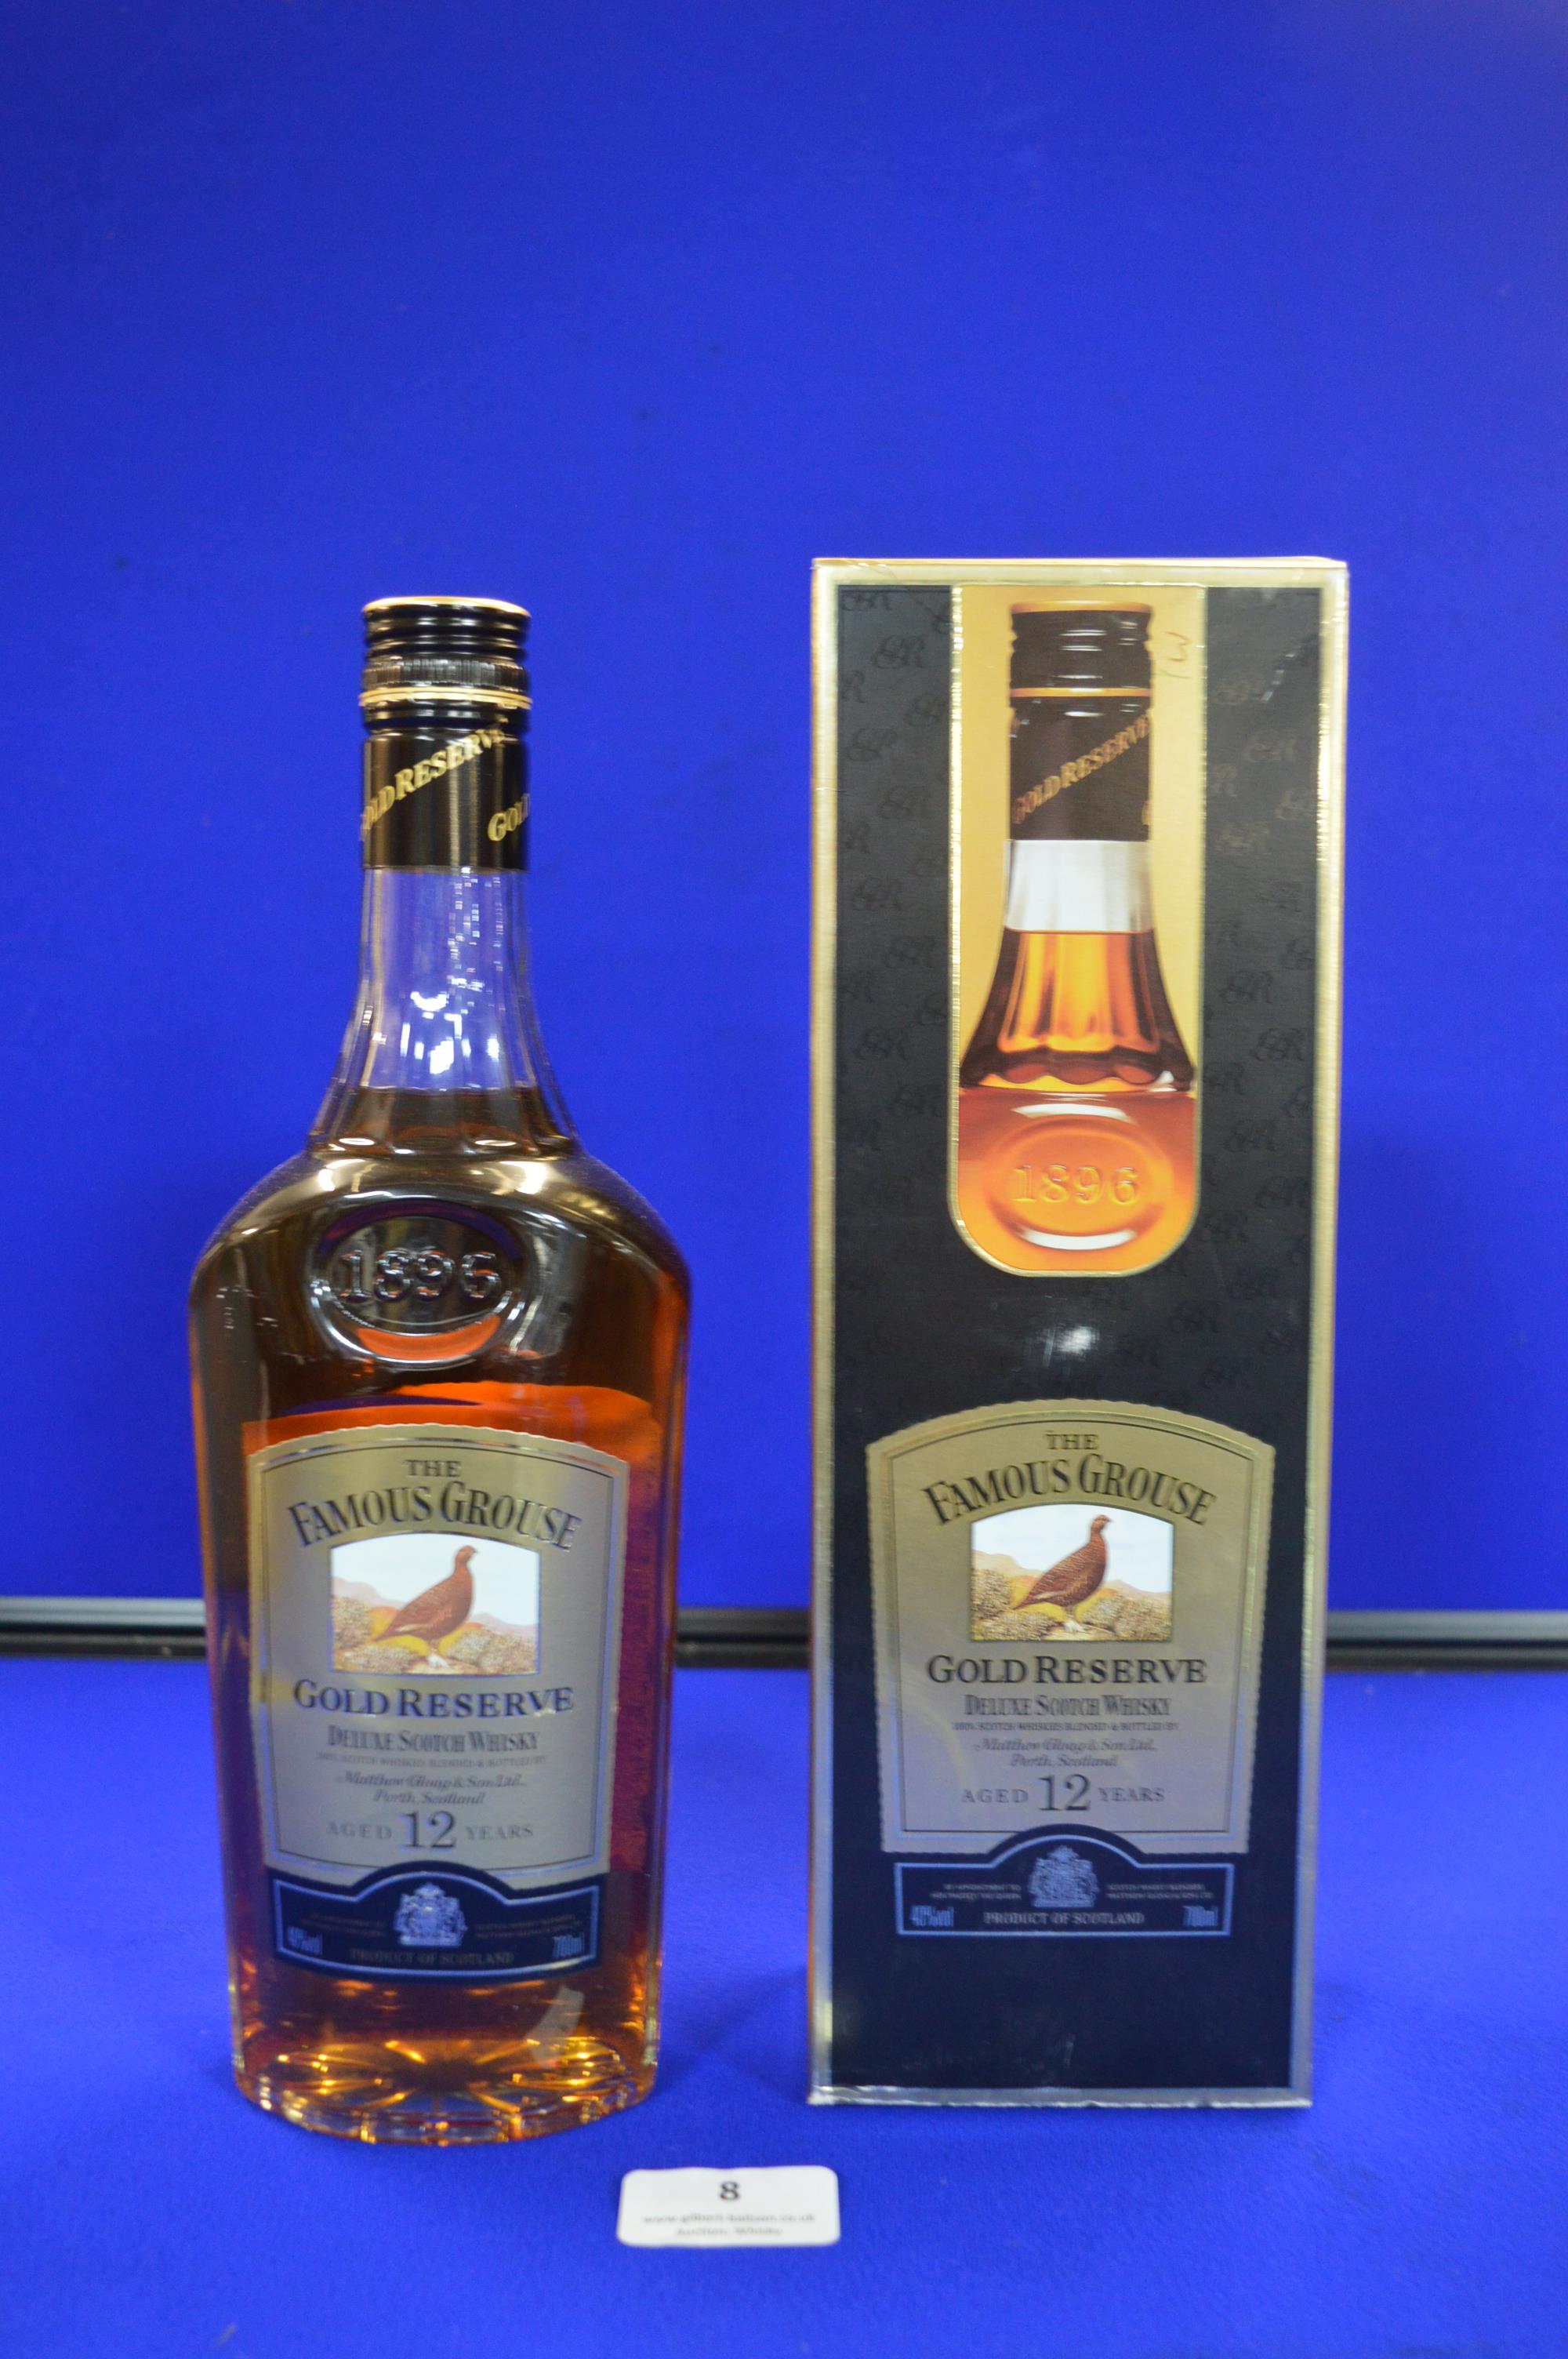 The Famous Grouse Gold Reserve Deluxe 12 Year Scotch Whisky